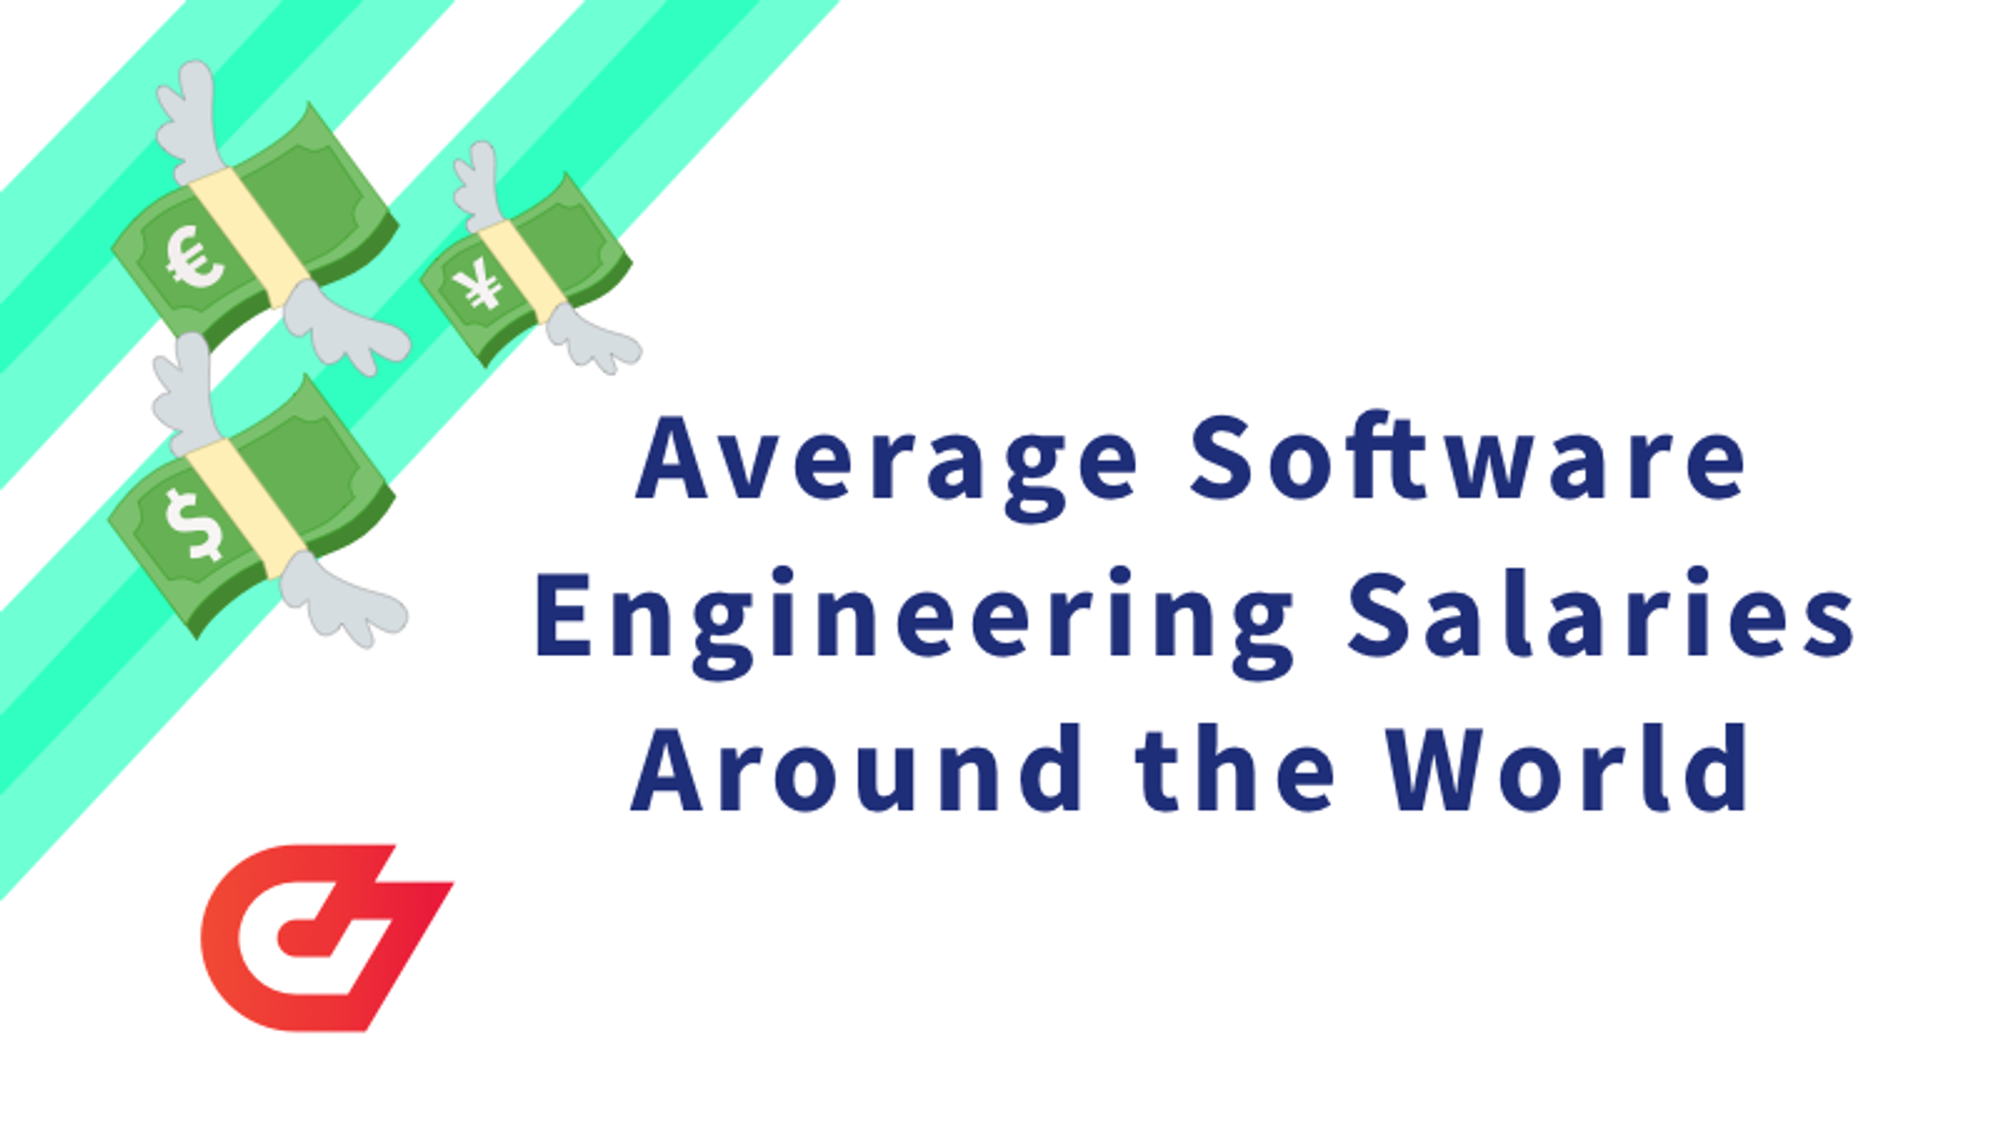 Average Software Engineering Salaries by Country in 2022